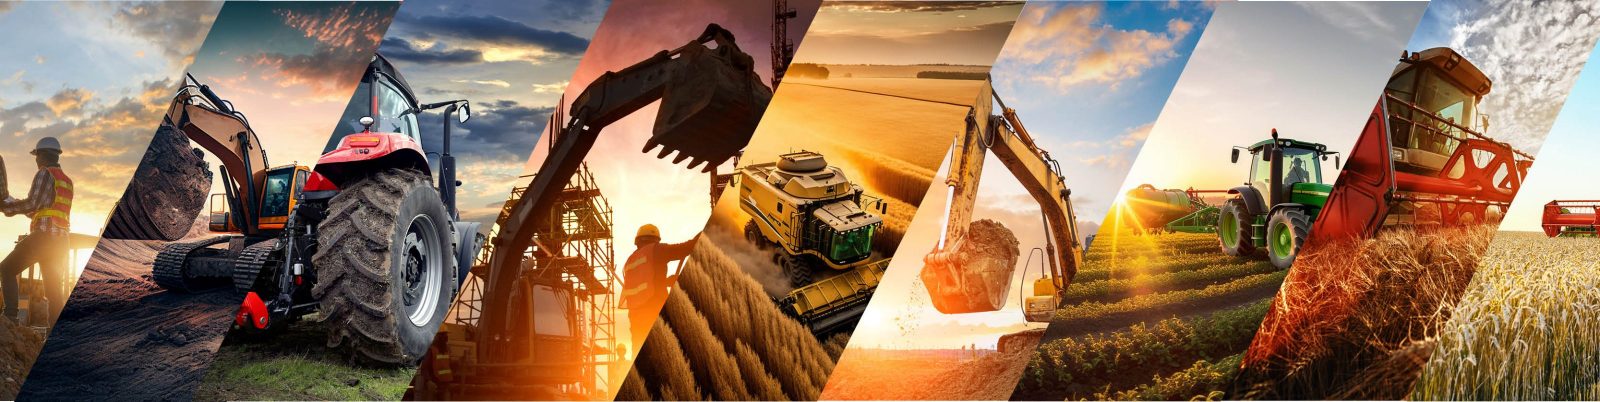 Agricultural, Construction & Earth Moving Equipment and Axalta thermosetting powder coatings